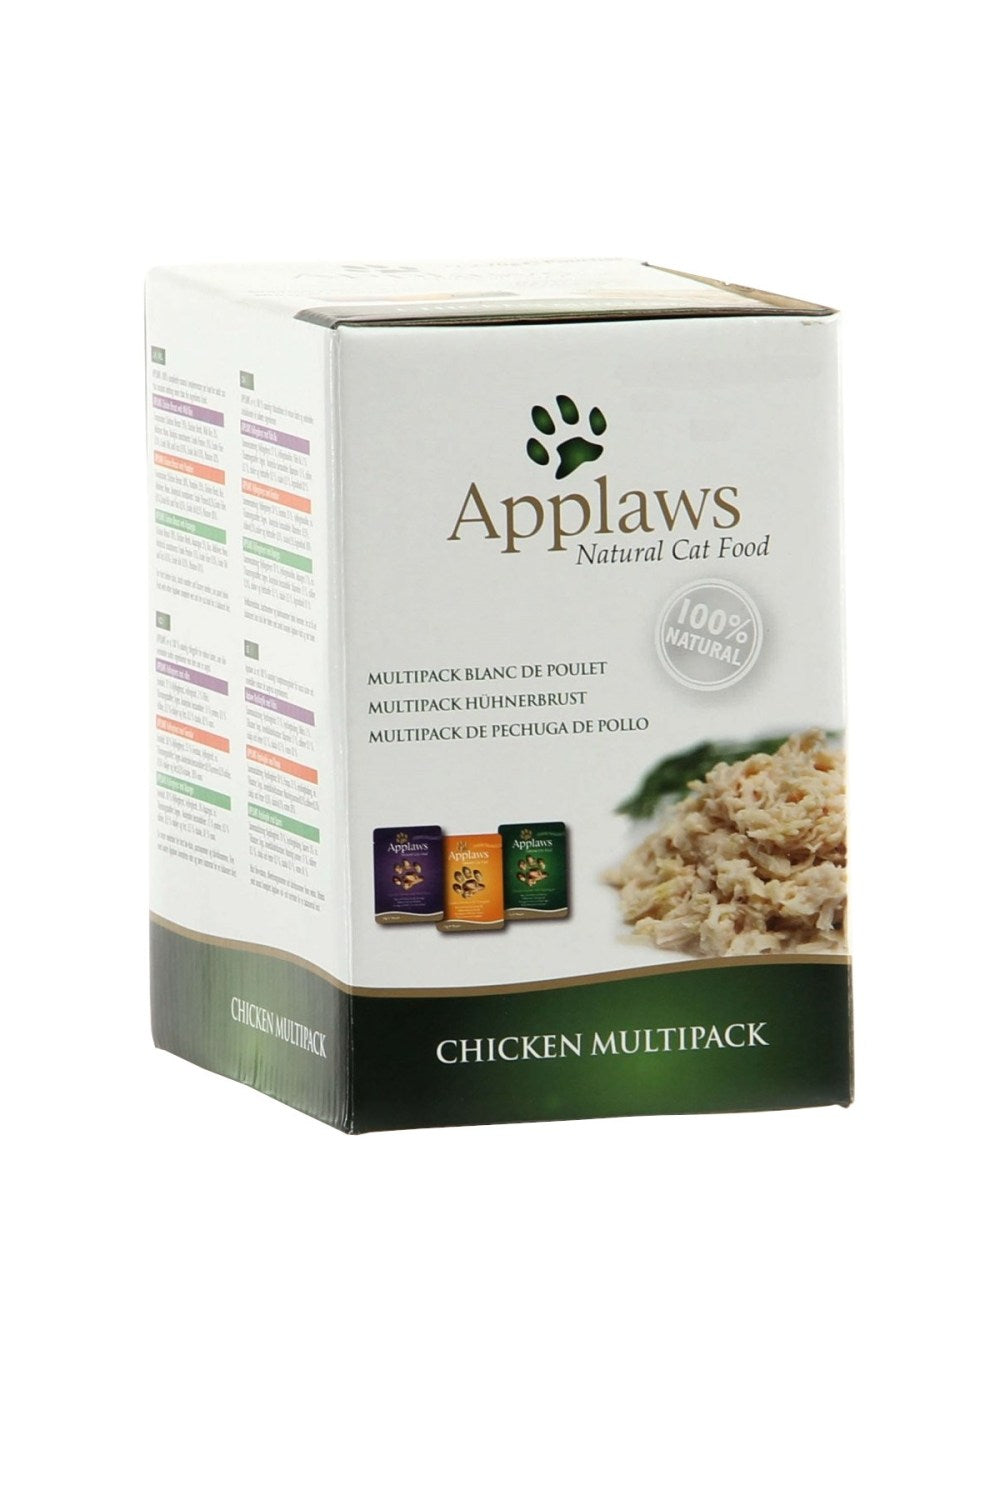 Applaws Complementary Wet Cat Food With Chicken (12 Pouches) (May Vary) (12 x 2.5oz)